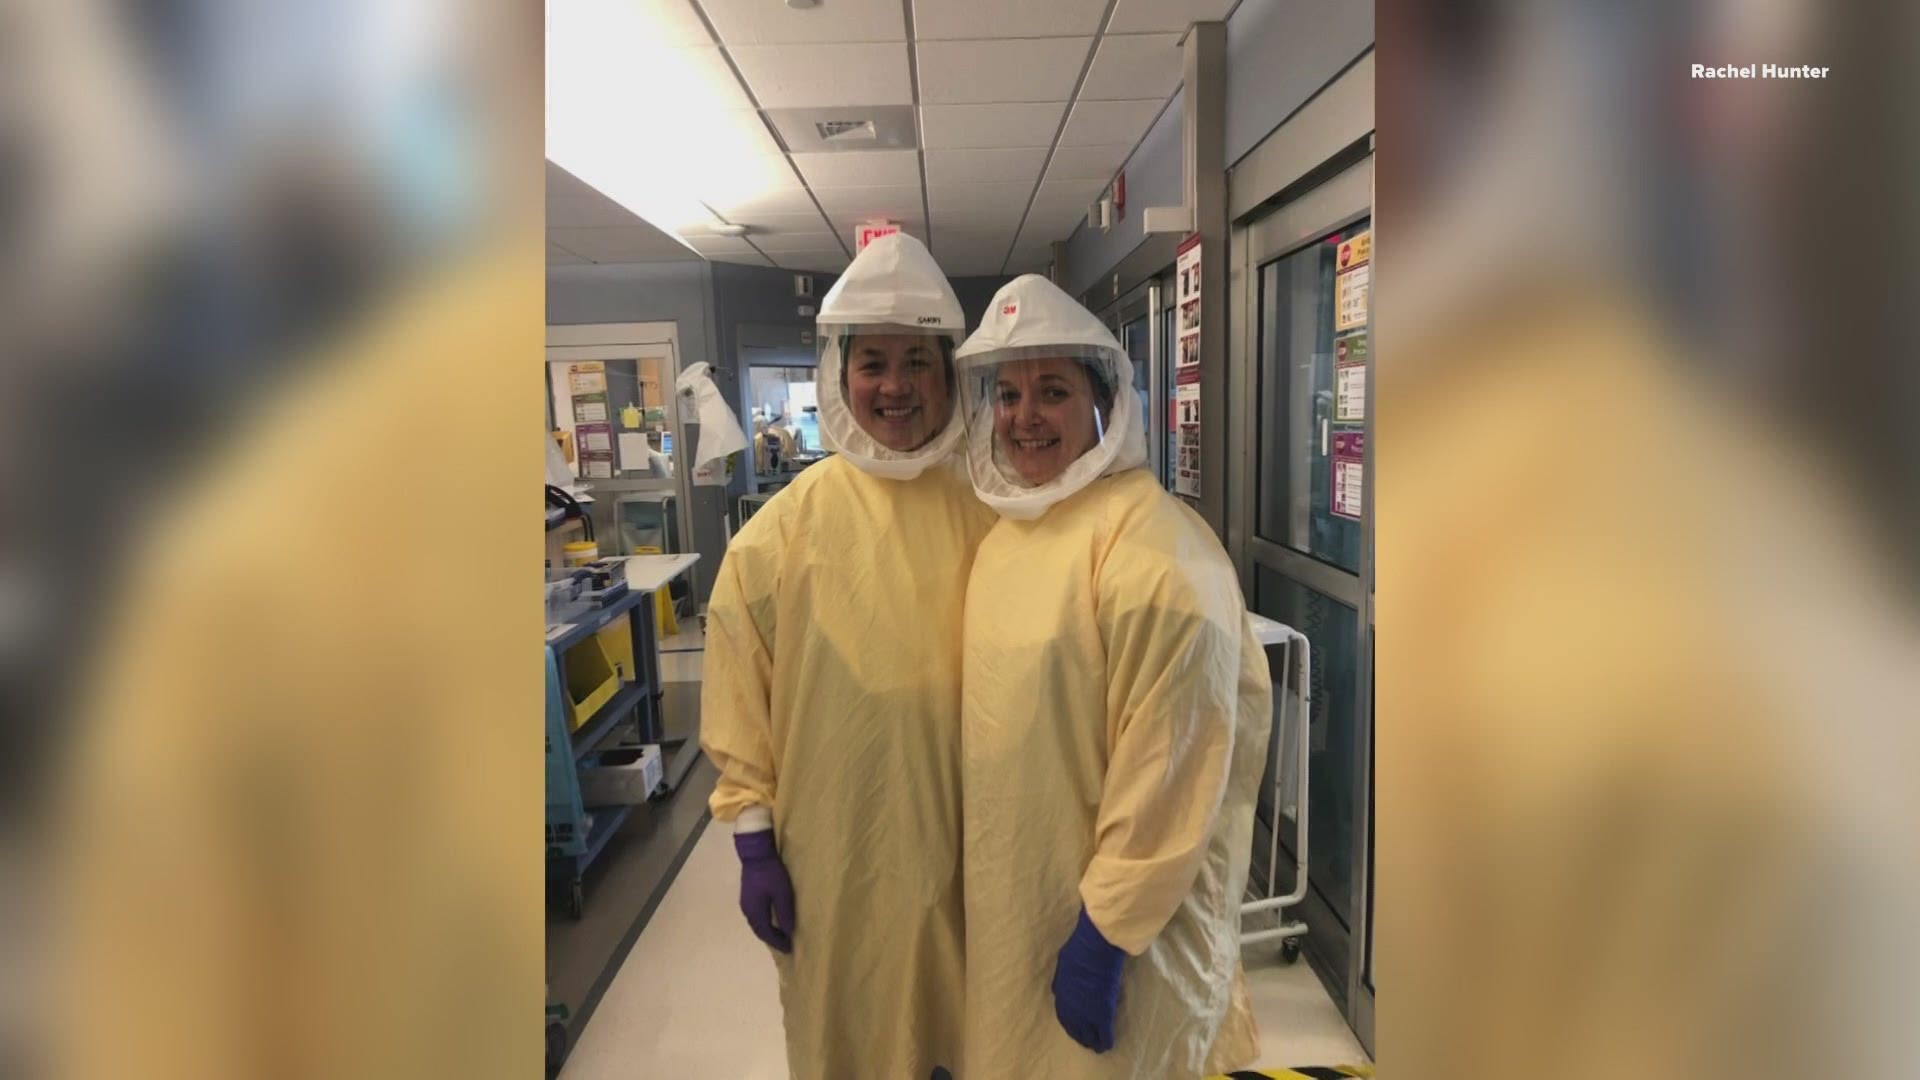 After one year on the frontlines of the battle against the pandemic, two nurses find comfort in their colleagues and urge Mainers to remain vigilant.